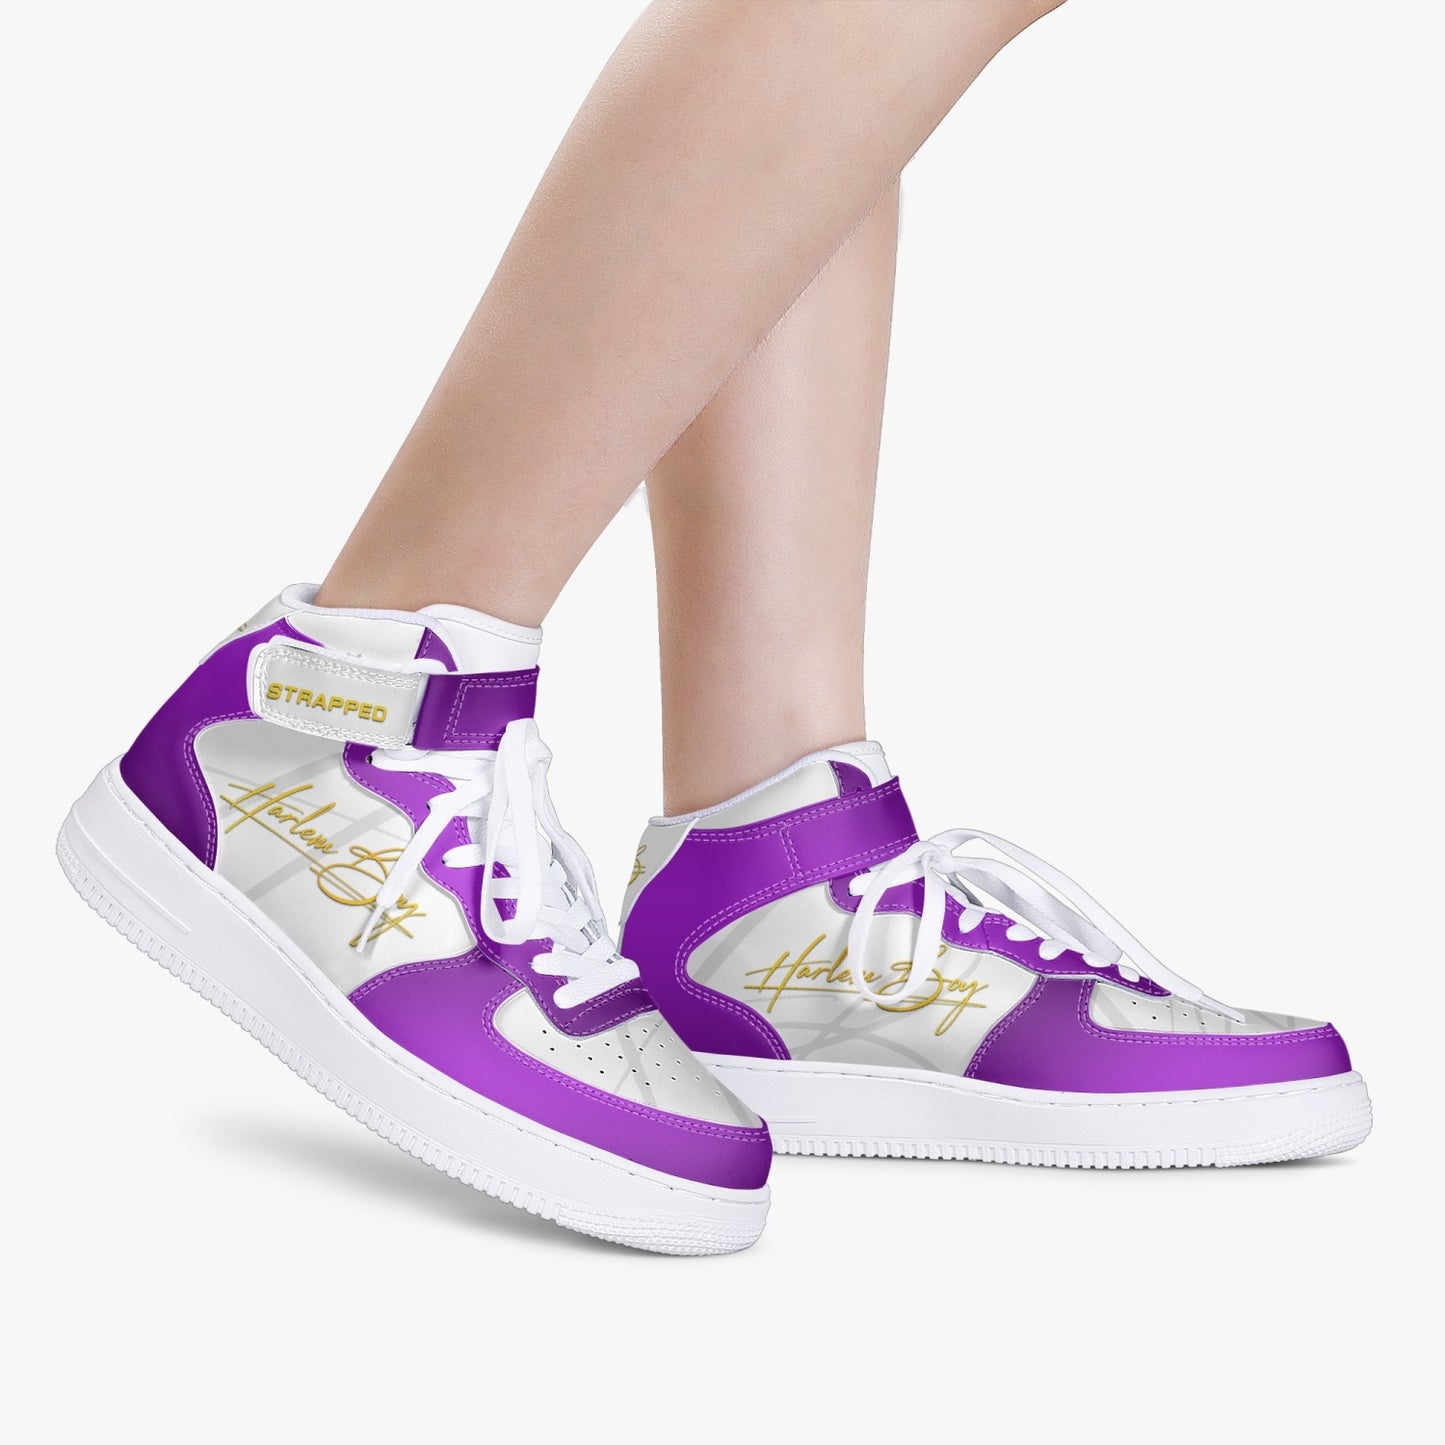 Harlem Boy "STRAPPED" MEN's High-Top Leather Kicks - Purple and Gold